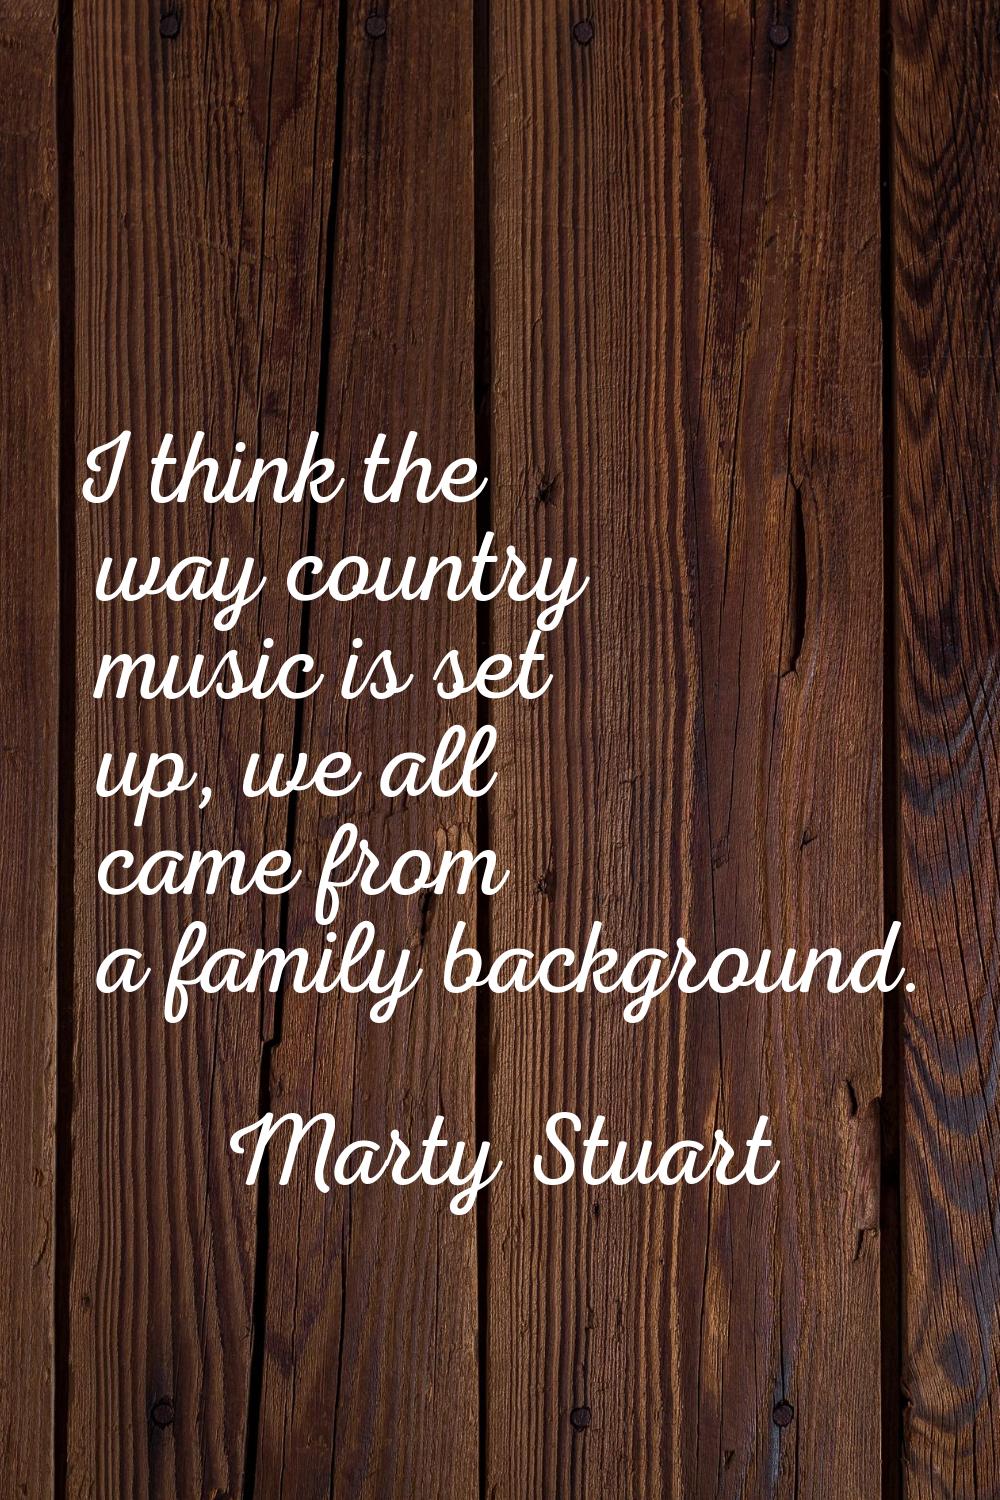 I think the way country music is set up, we all came from a family background.